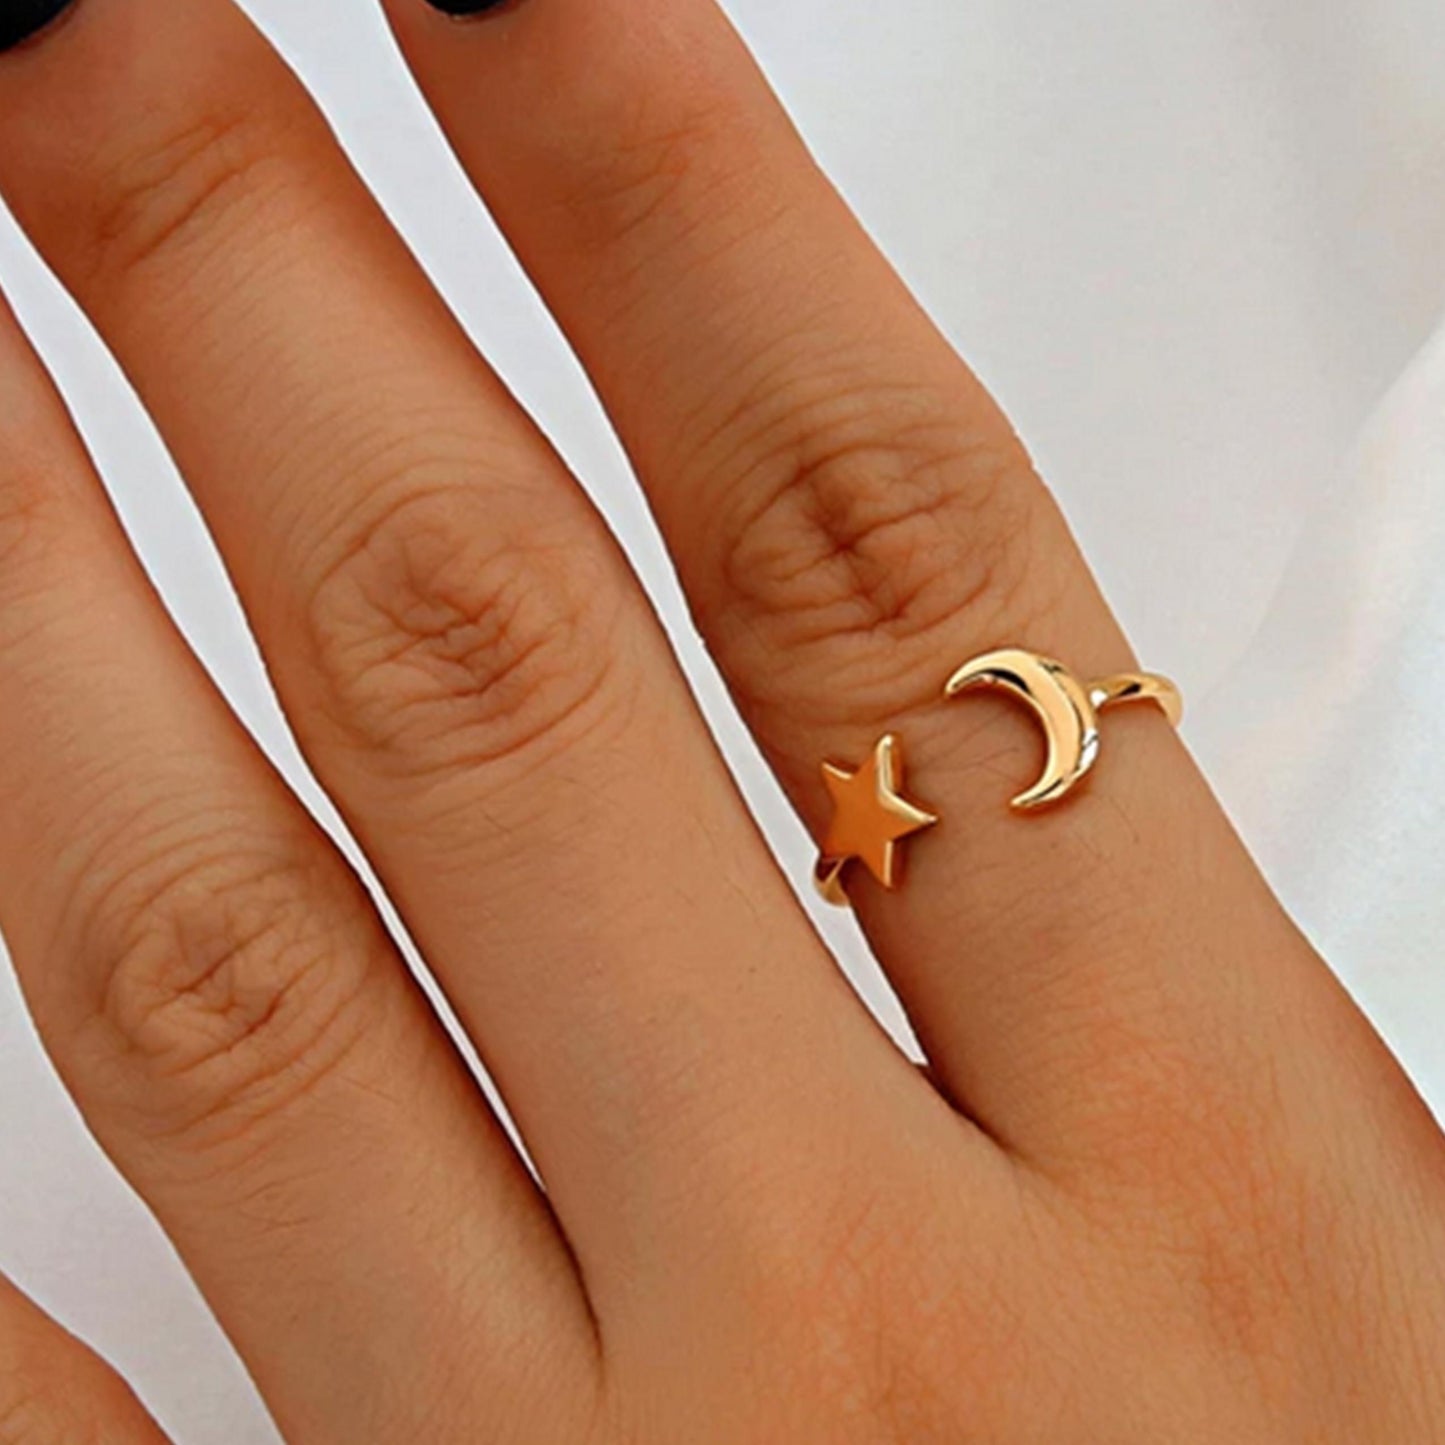 Star Goals Empowerment Adjustable Ring - Gold - Cheer and Dance On Demand